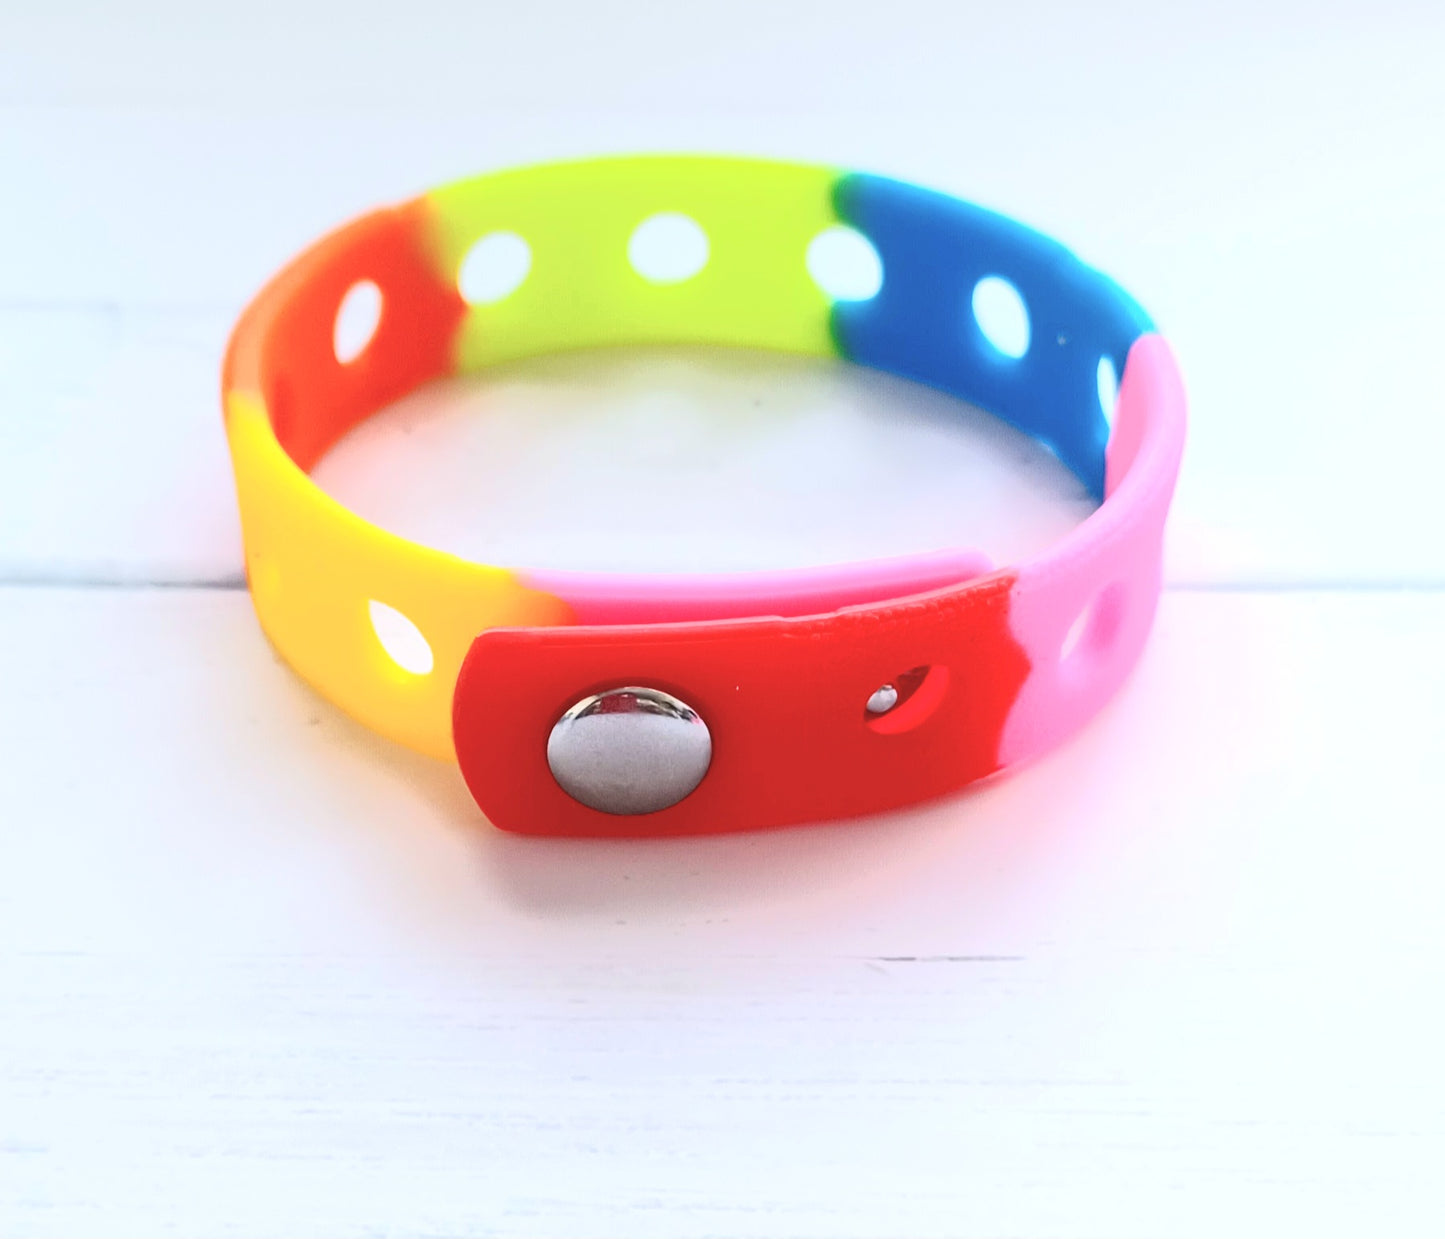 Colorful Adjustable Silicone Croc Charms Wristbands/Bracelets for Adults and Teens 12 Colors 8.26 inches